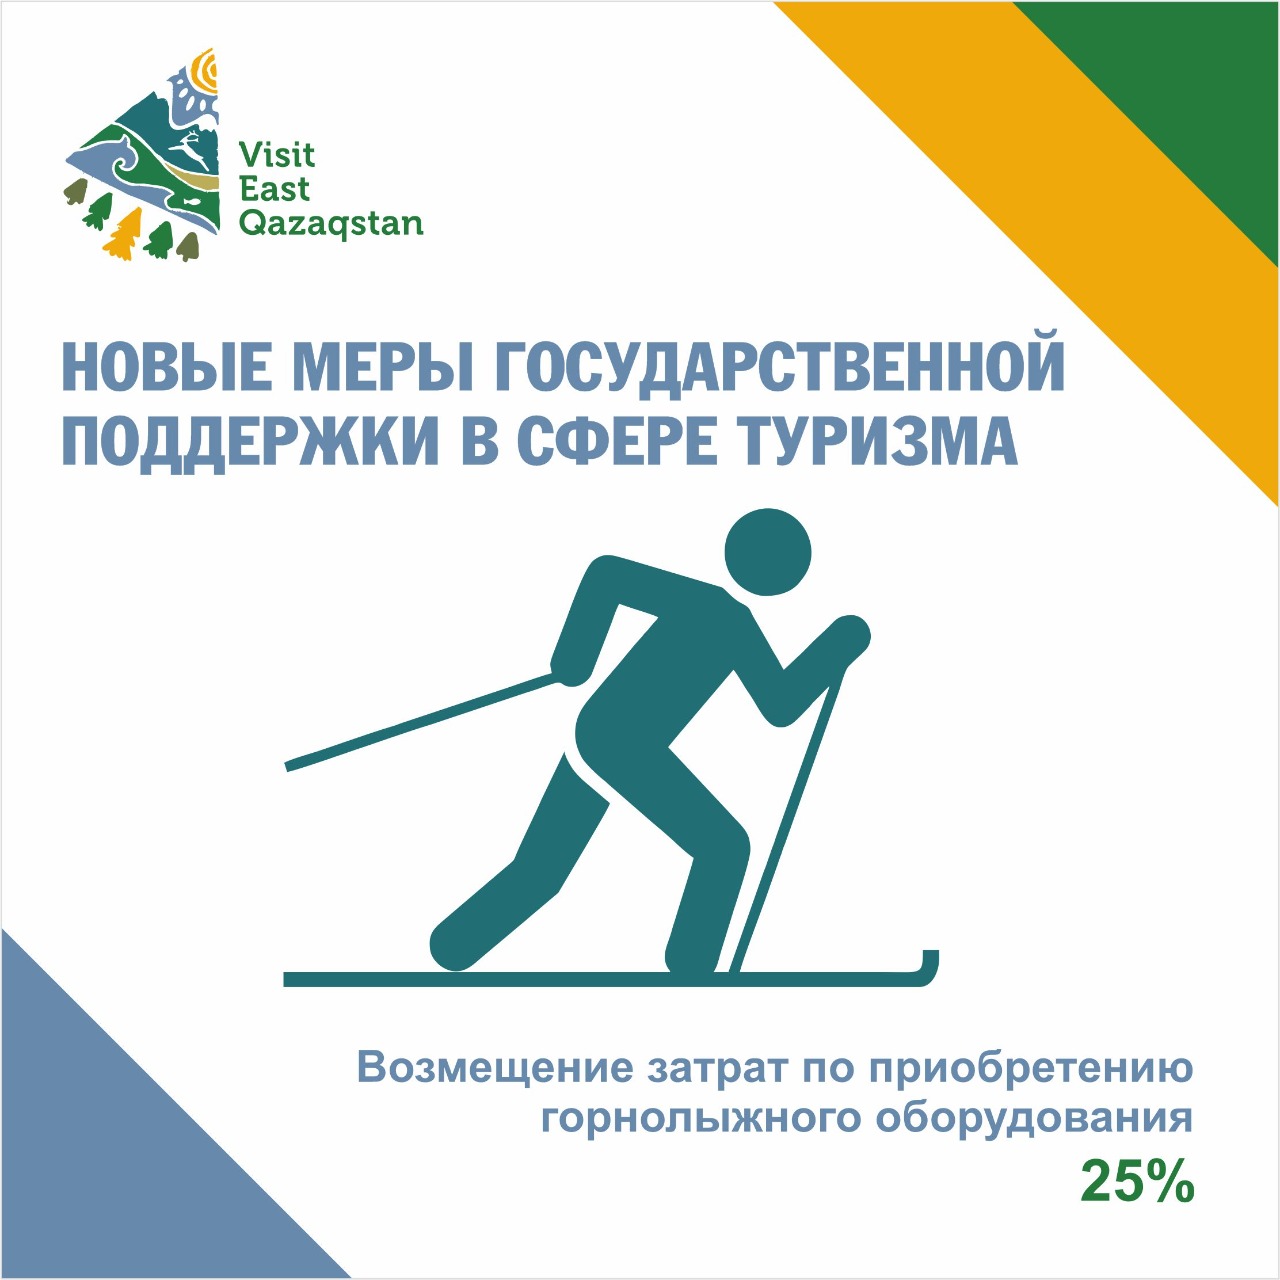 To the attention of the ski resorts of the Republic of Kazakhstan!